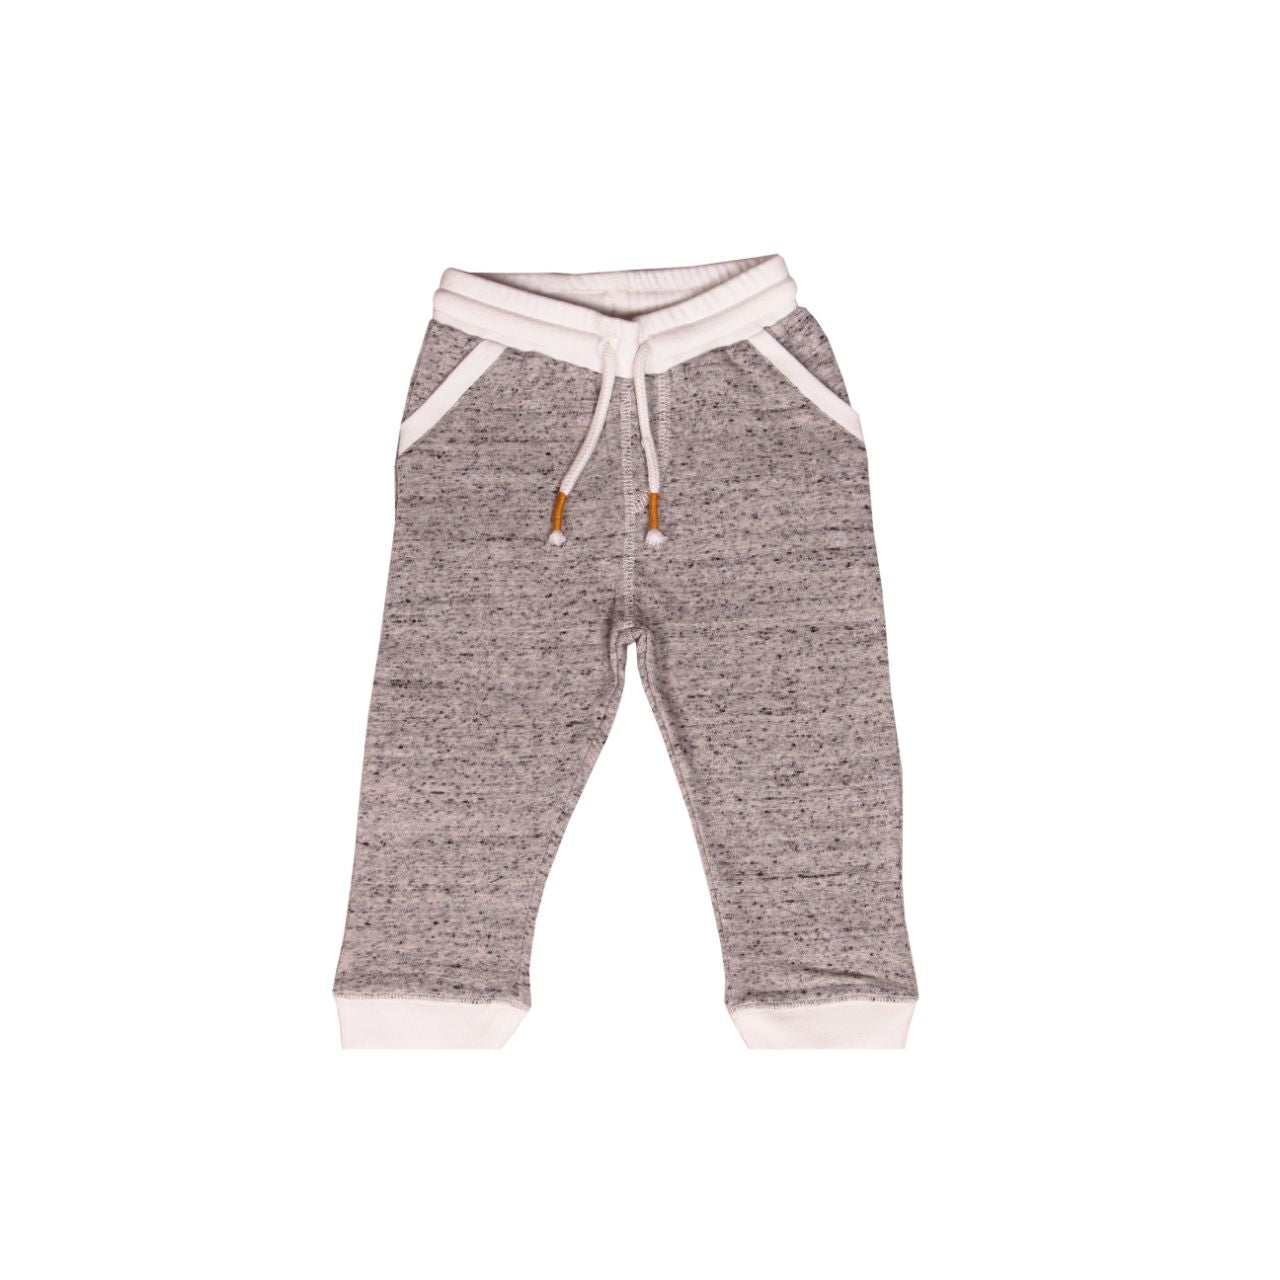 Kevin 2 Piece Baby Set